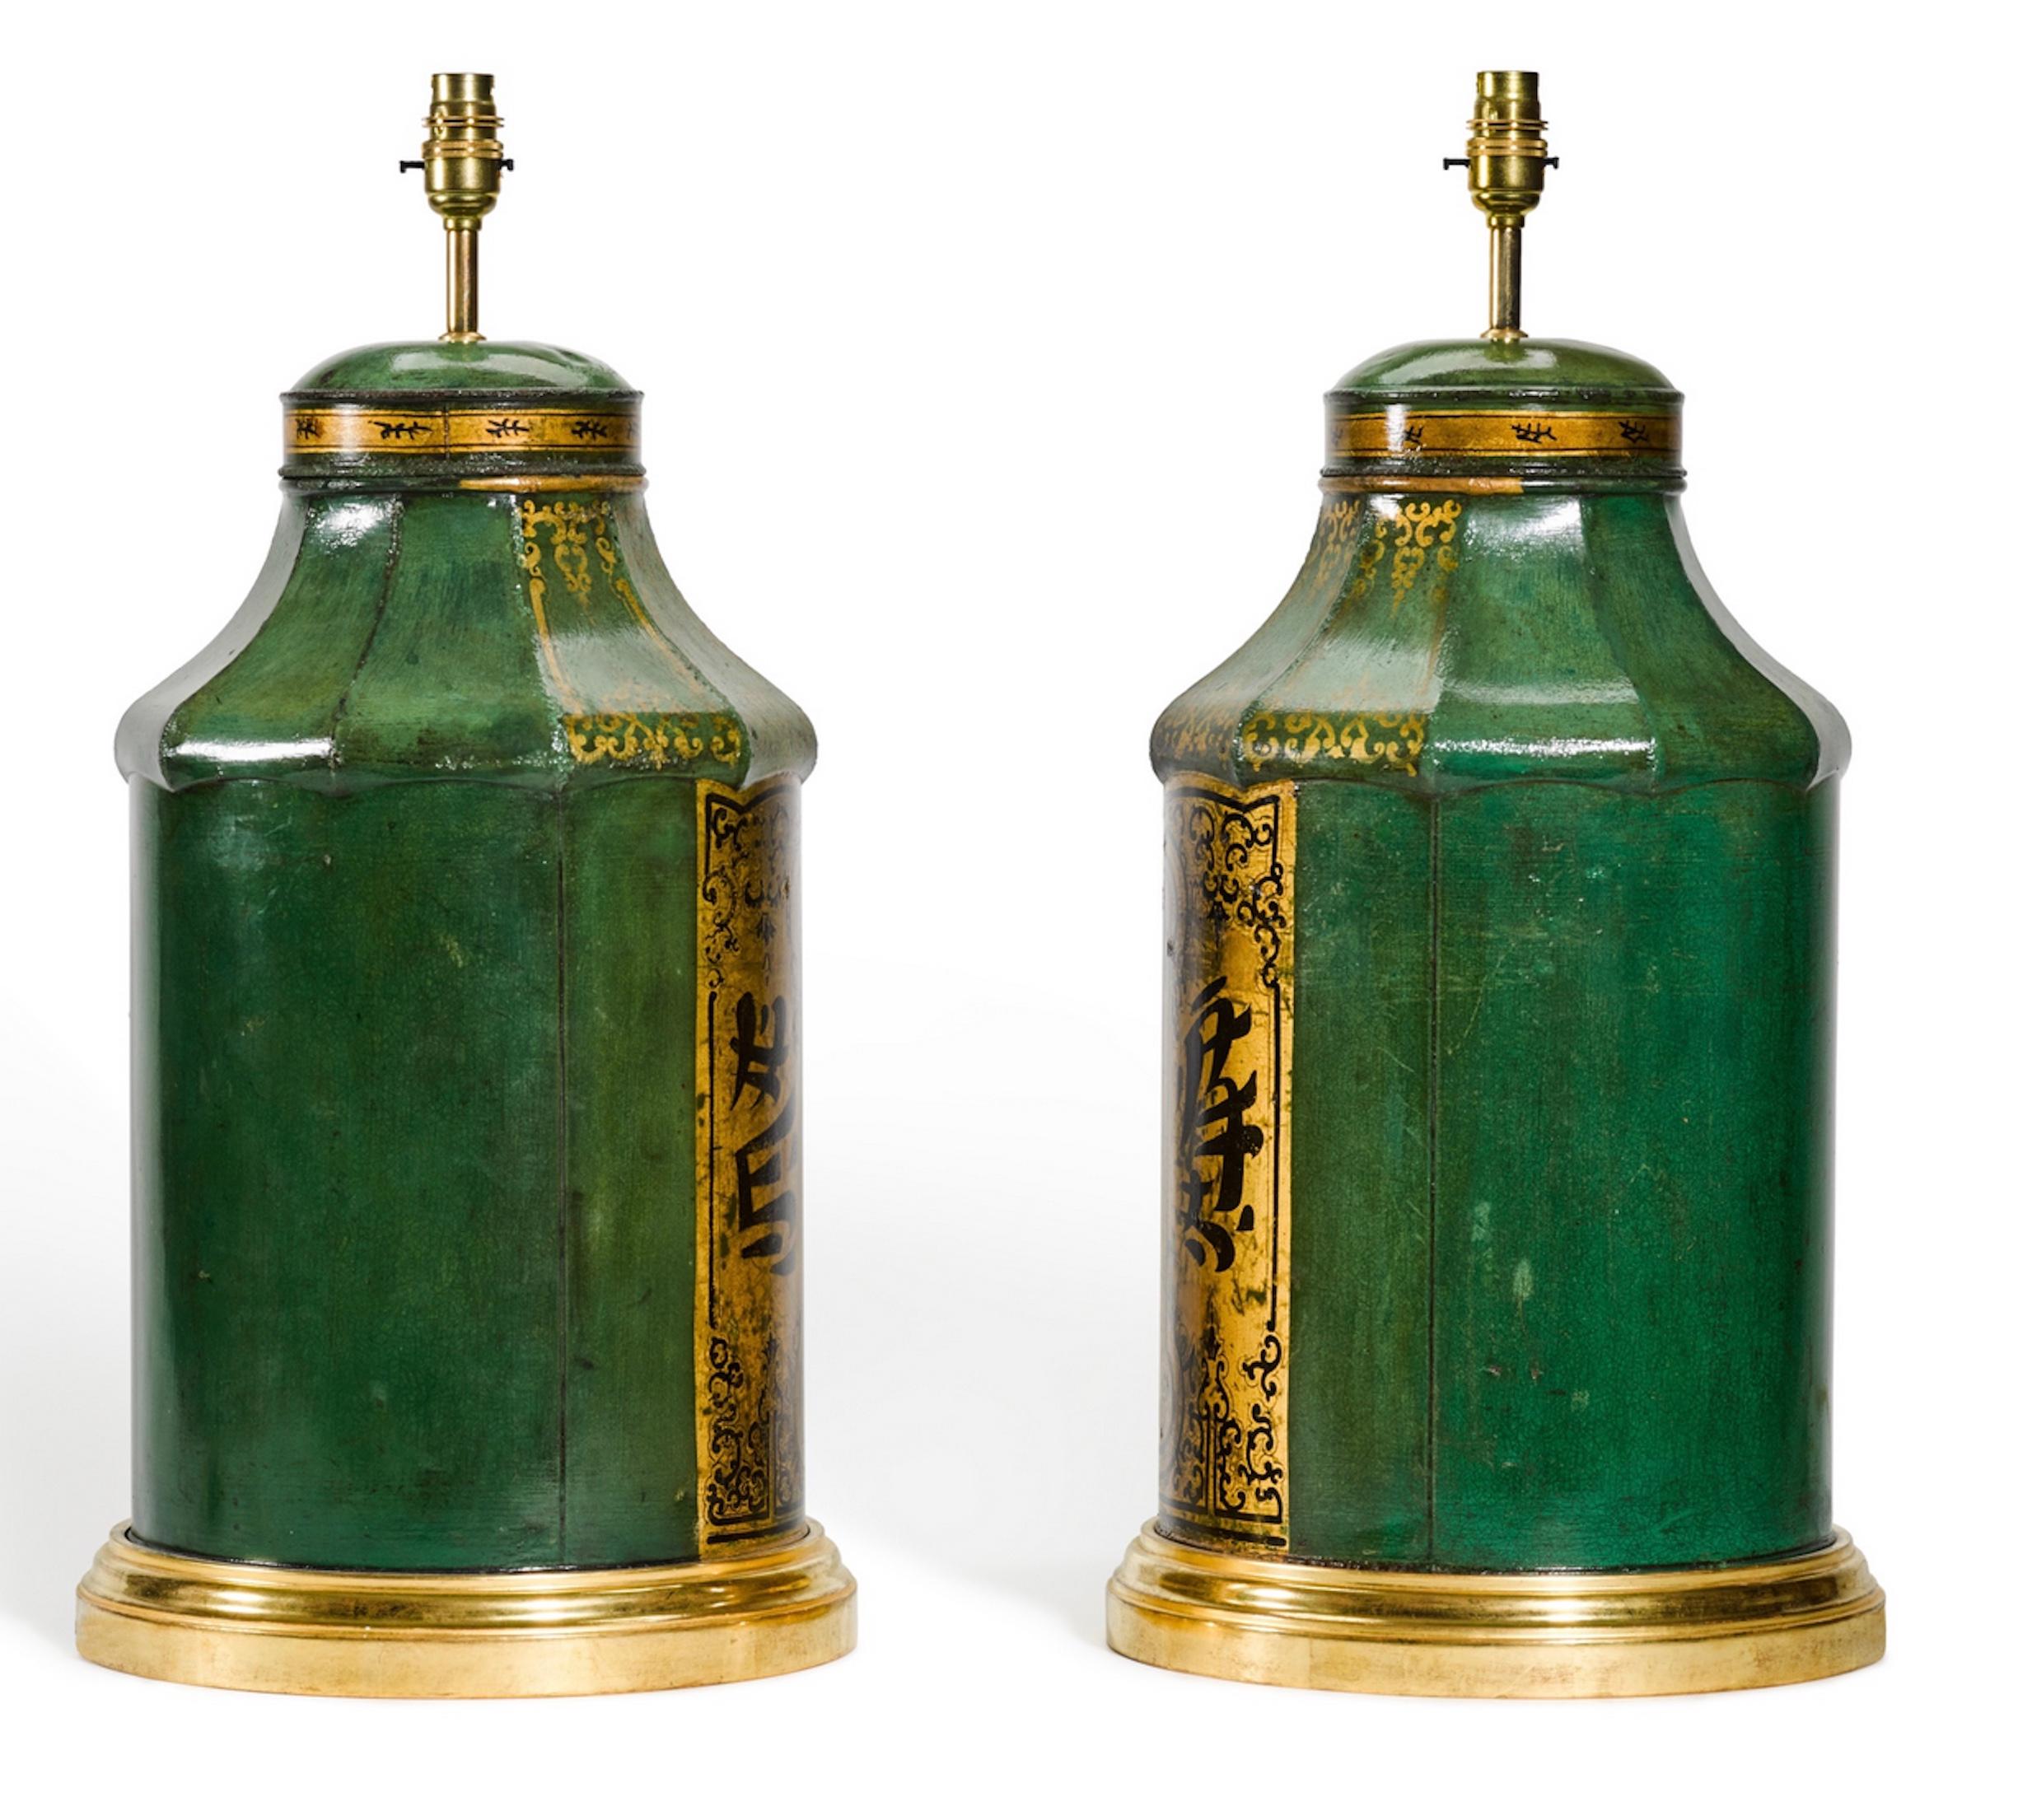 Pair of Gold and Green 19th Century Tea Canister Antique Table Lamps In Good Condition For Sale In London, GB